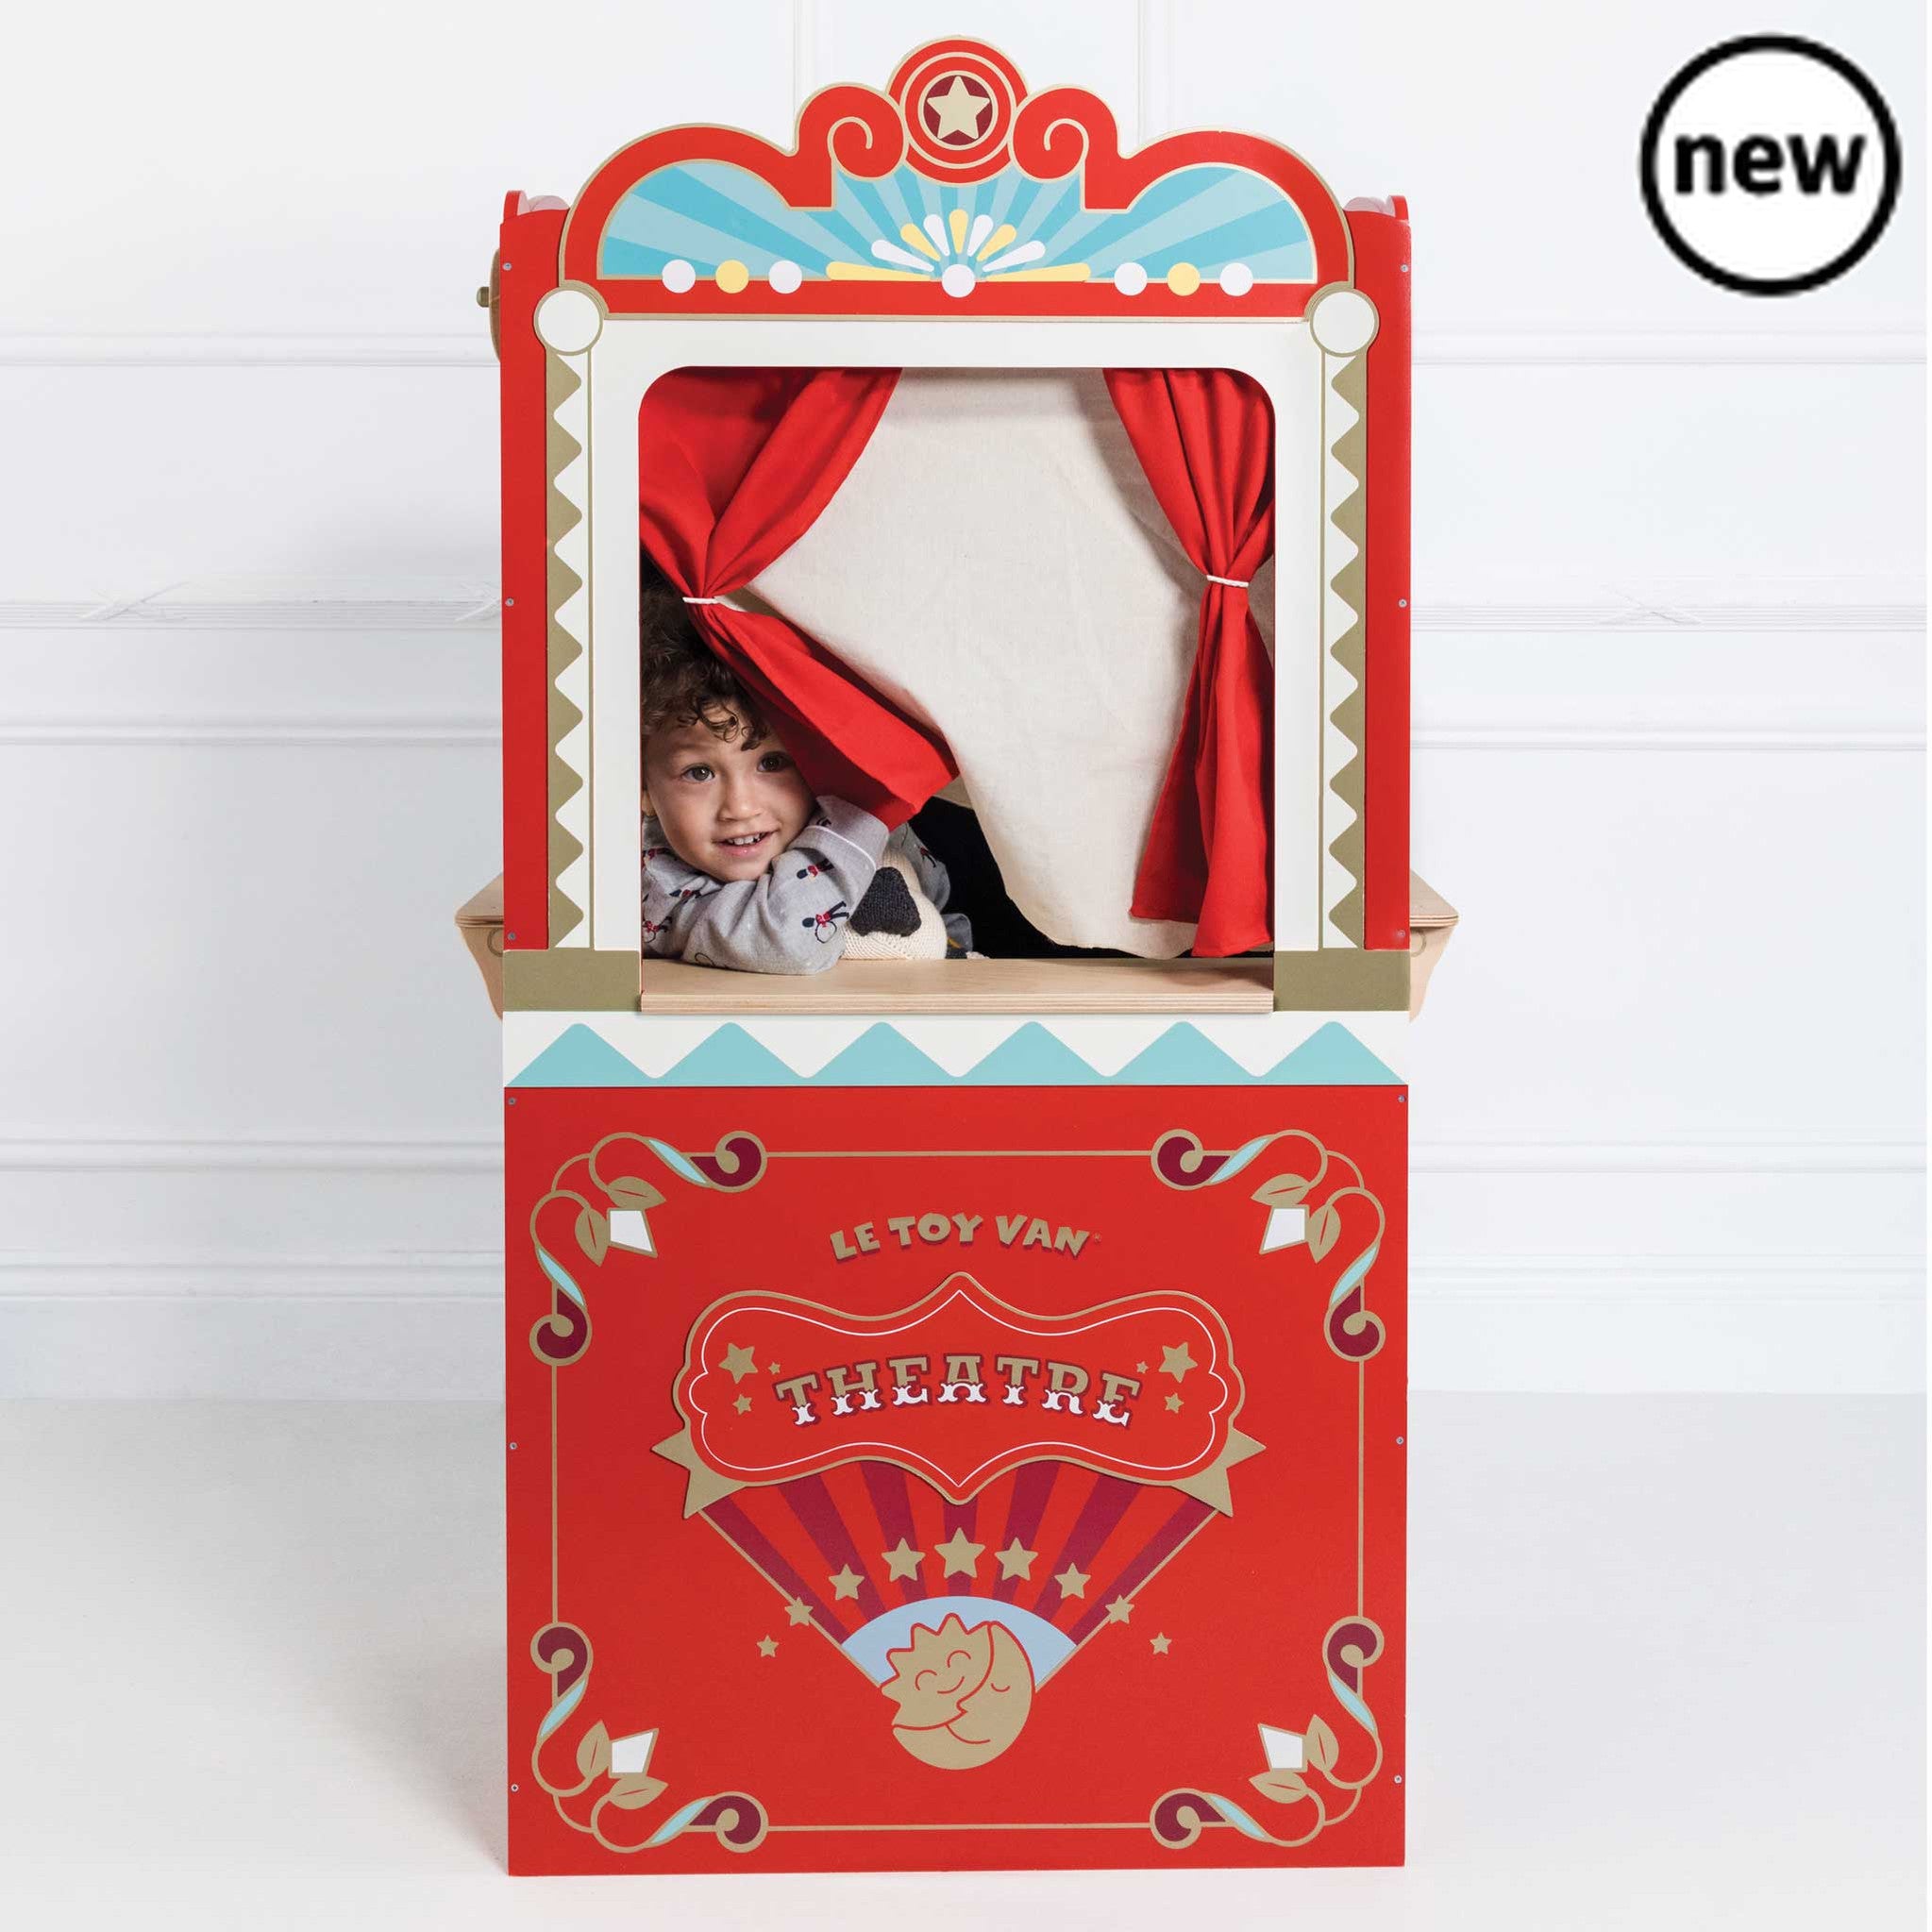 Showtime Puppet Theatre, Description The stage is set for roleplay fun! This amazing retro wooden puppet theatre toy is a real showstopper. With it's unique nostalgic design and brightly painted exterior, crafted from durable, sustainable wood. Little performers will adore this interactive toy, crammed with many realistic features to inspire imaginative learning. With a reversible sign, stage door and two chalk boards to display up and coming acts. For dramatic effect, we've included a pair of beautiful red